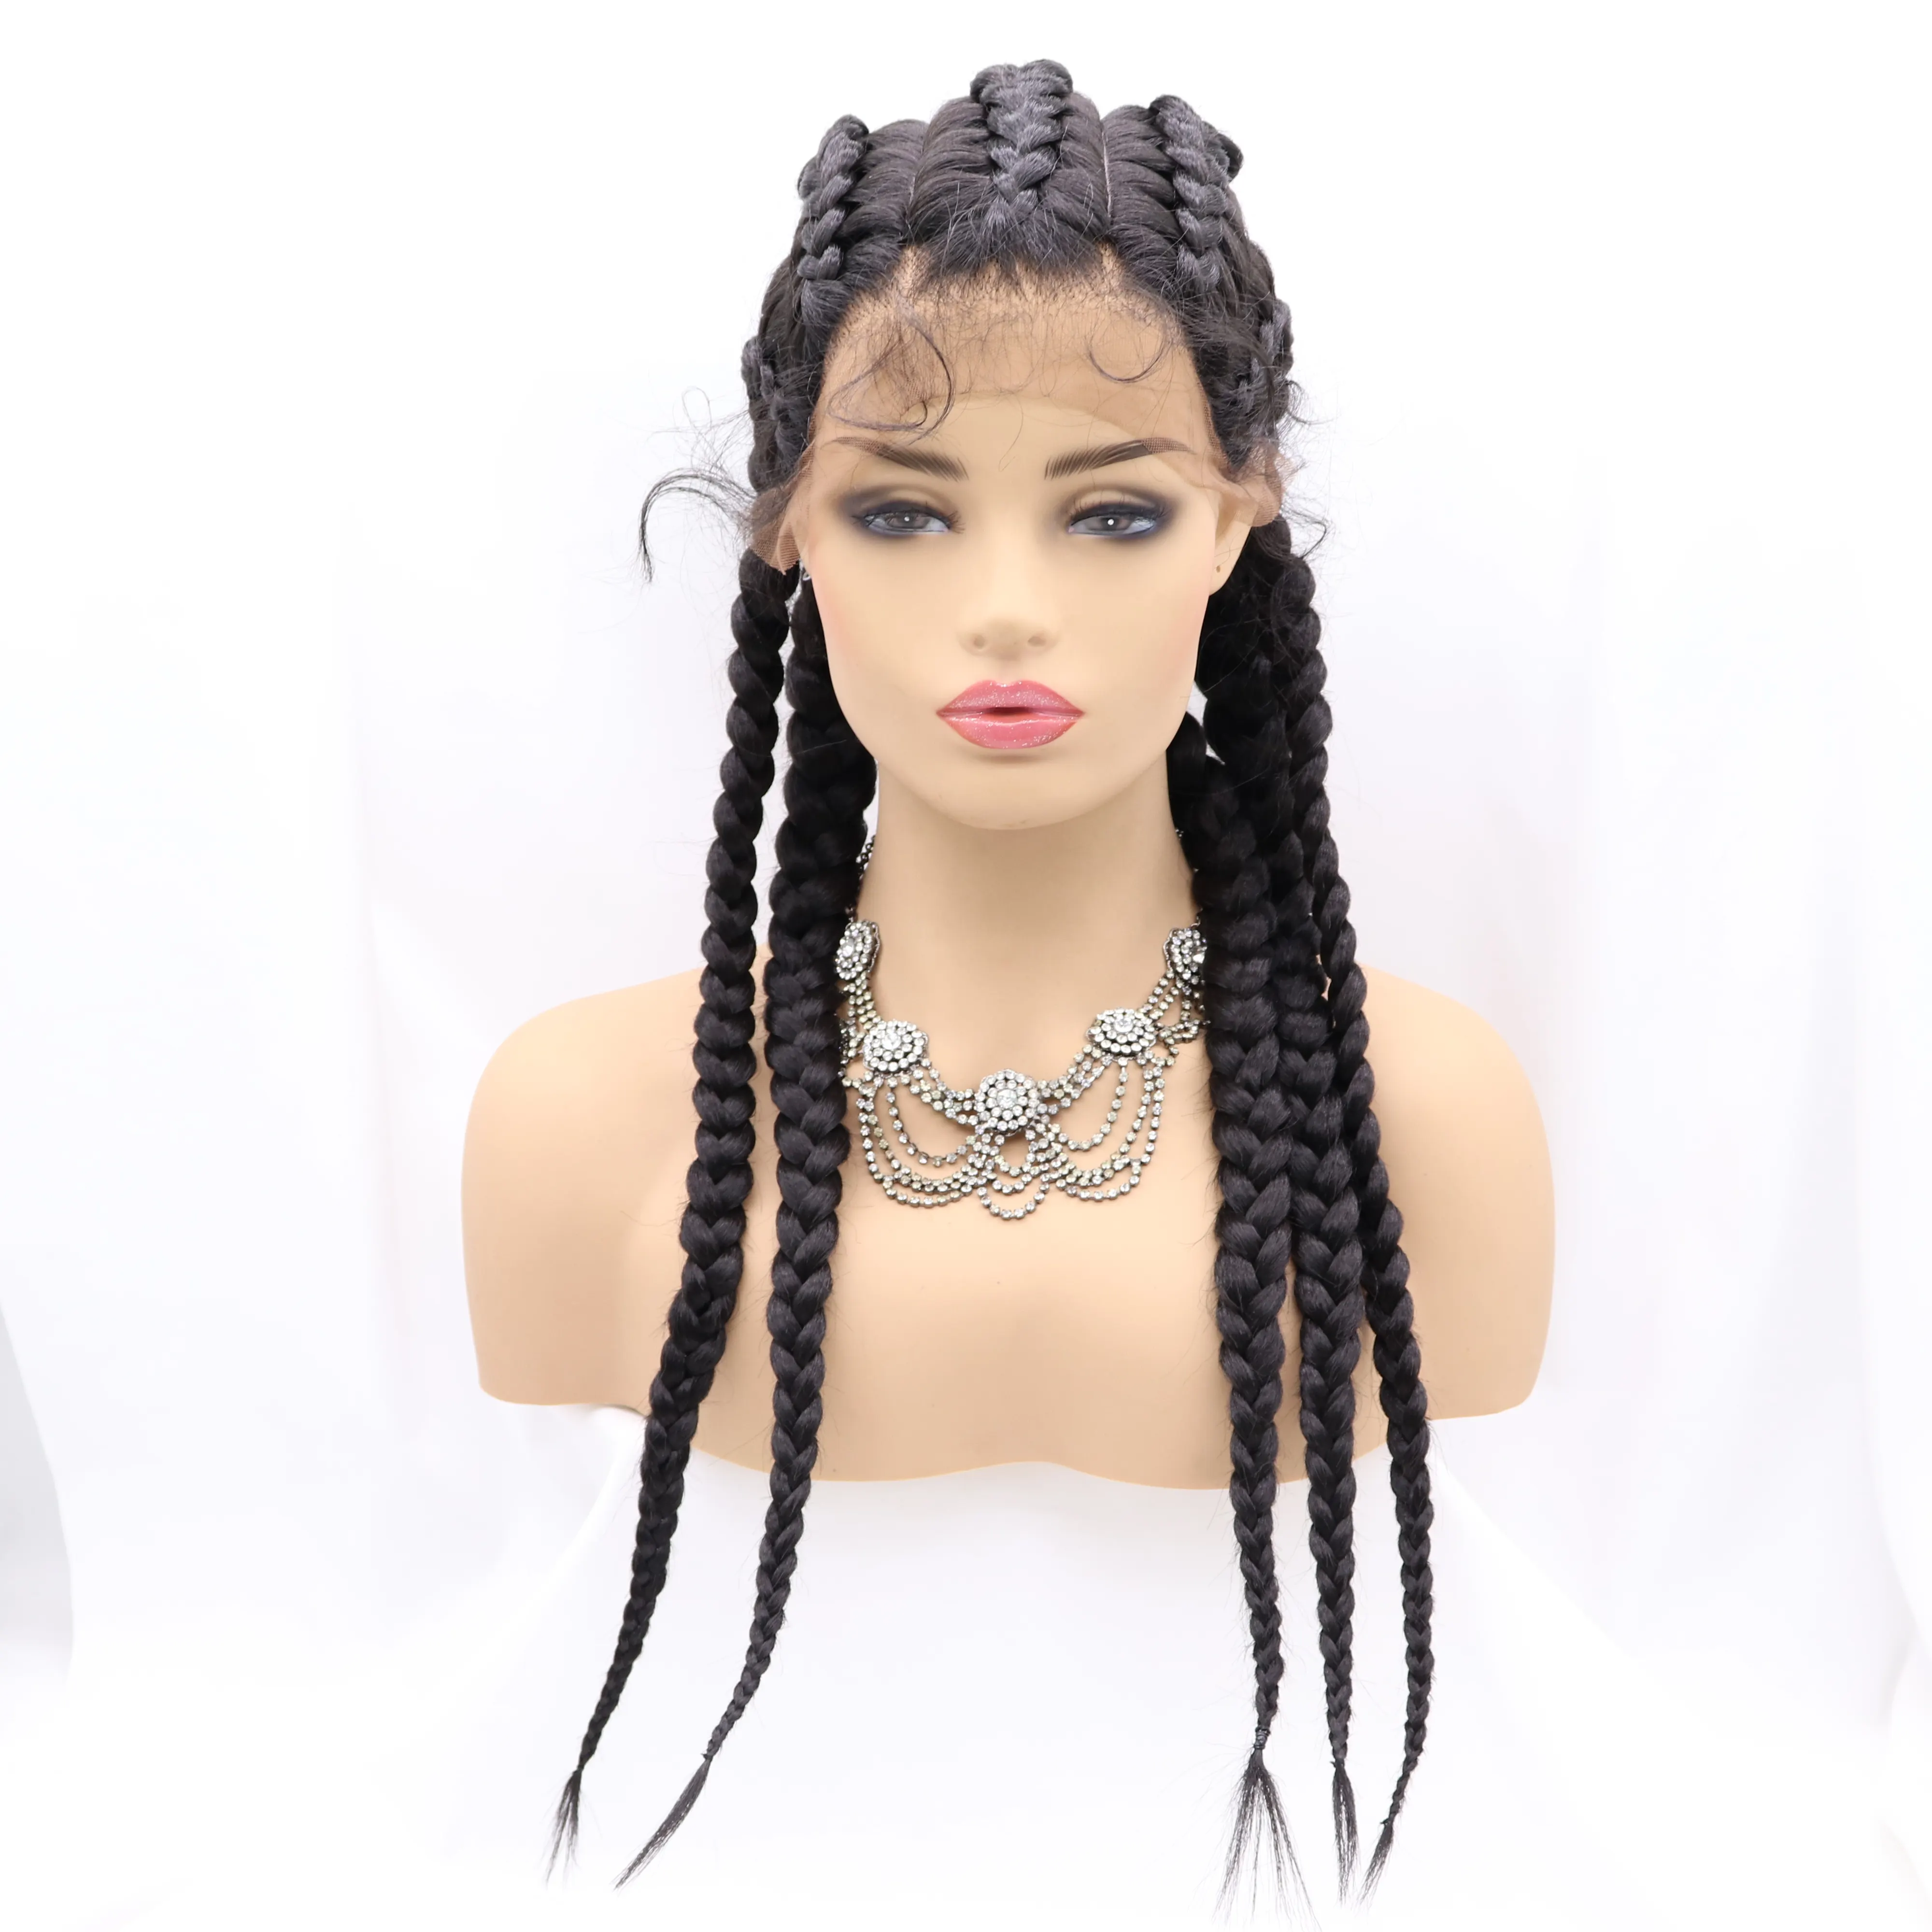 Wholesale transparent lace braided wigs with bangs hair braided wig for black women front lace blonde lace frontal wigs braided